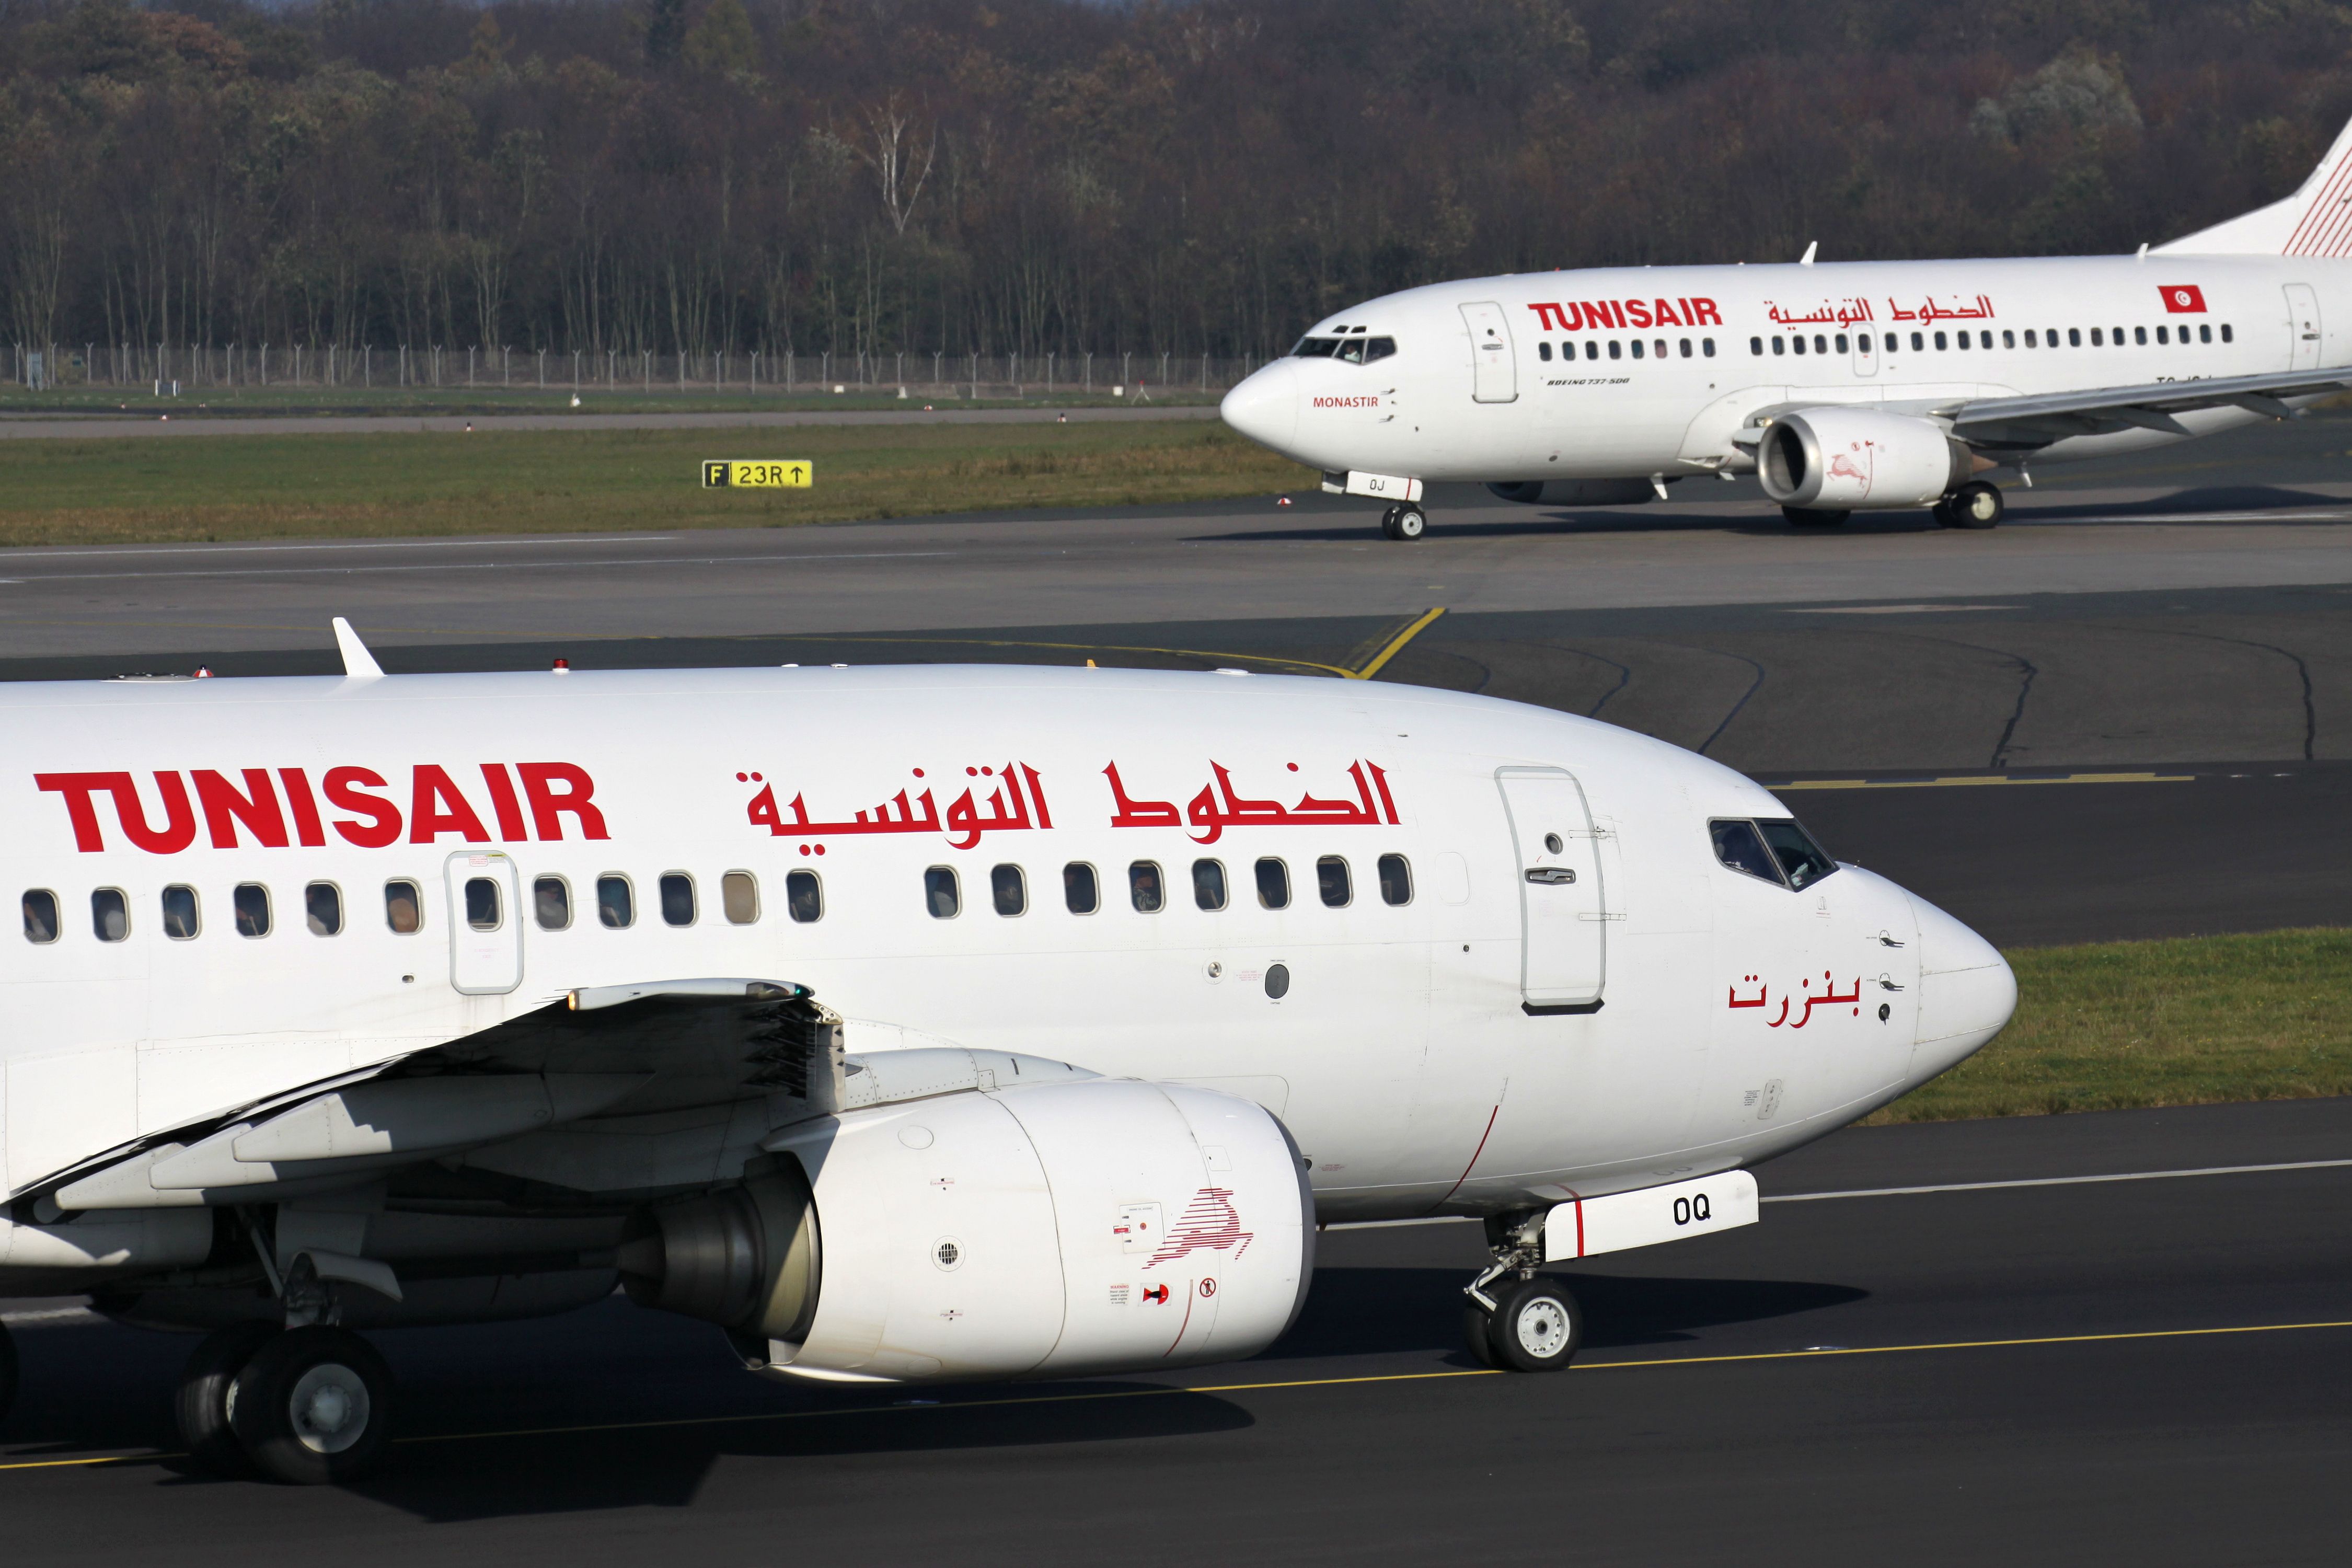 Tunisair Boeing 737-600 with registration TS-IOQ together with TS-IOJ at Dusseldorf Airport